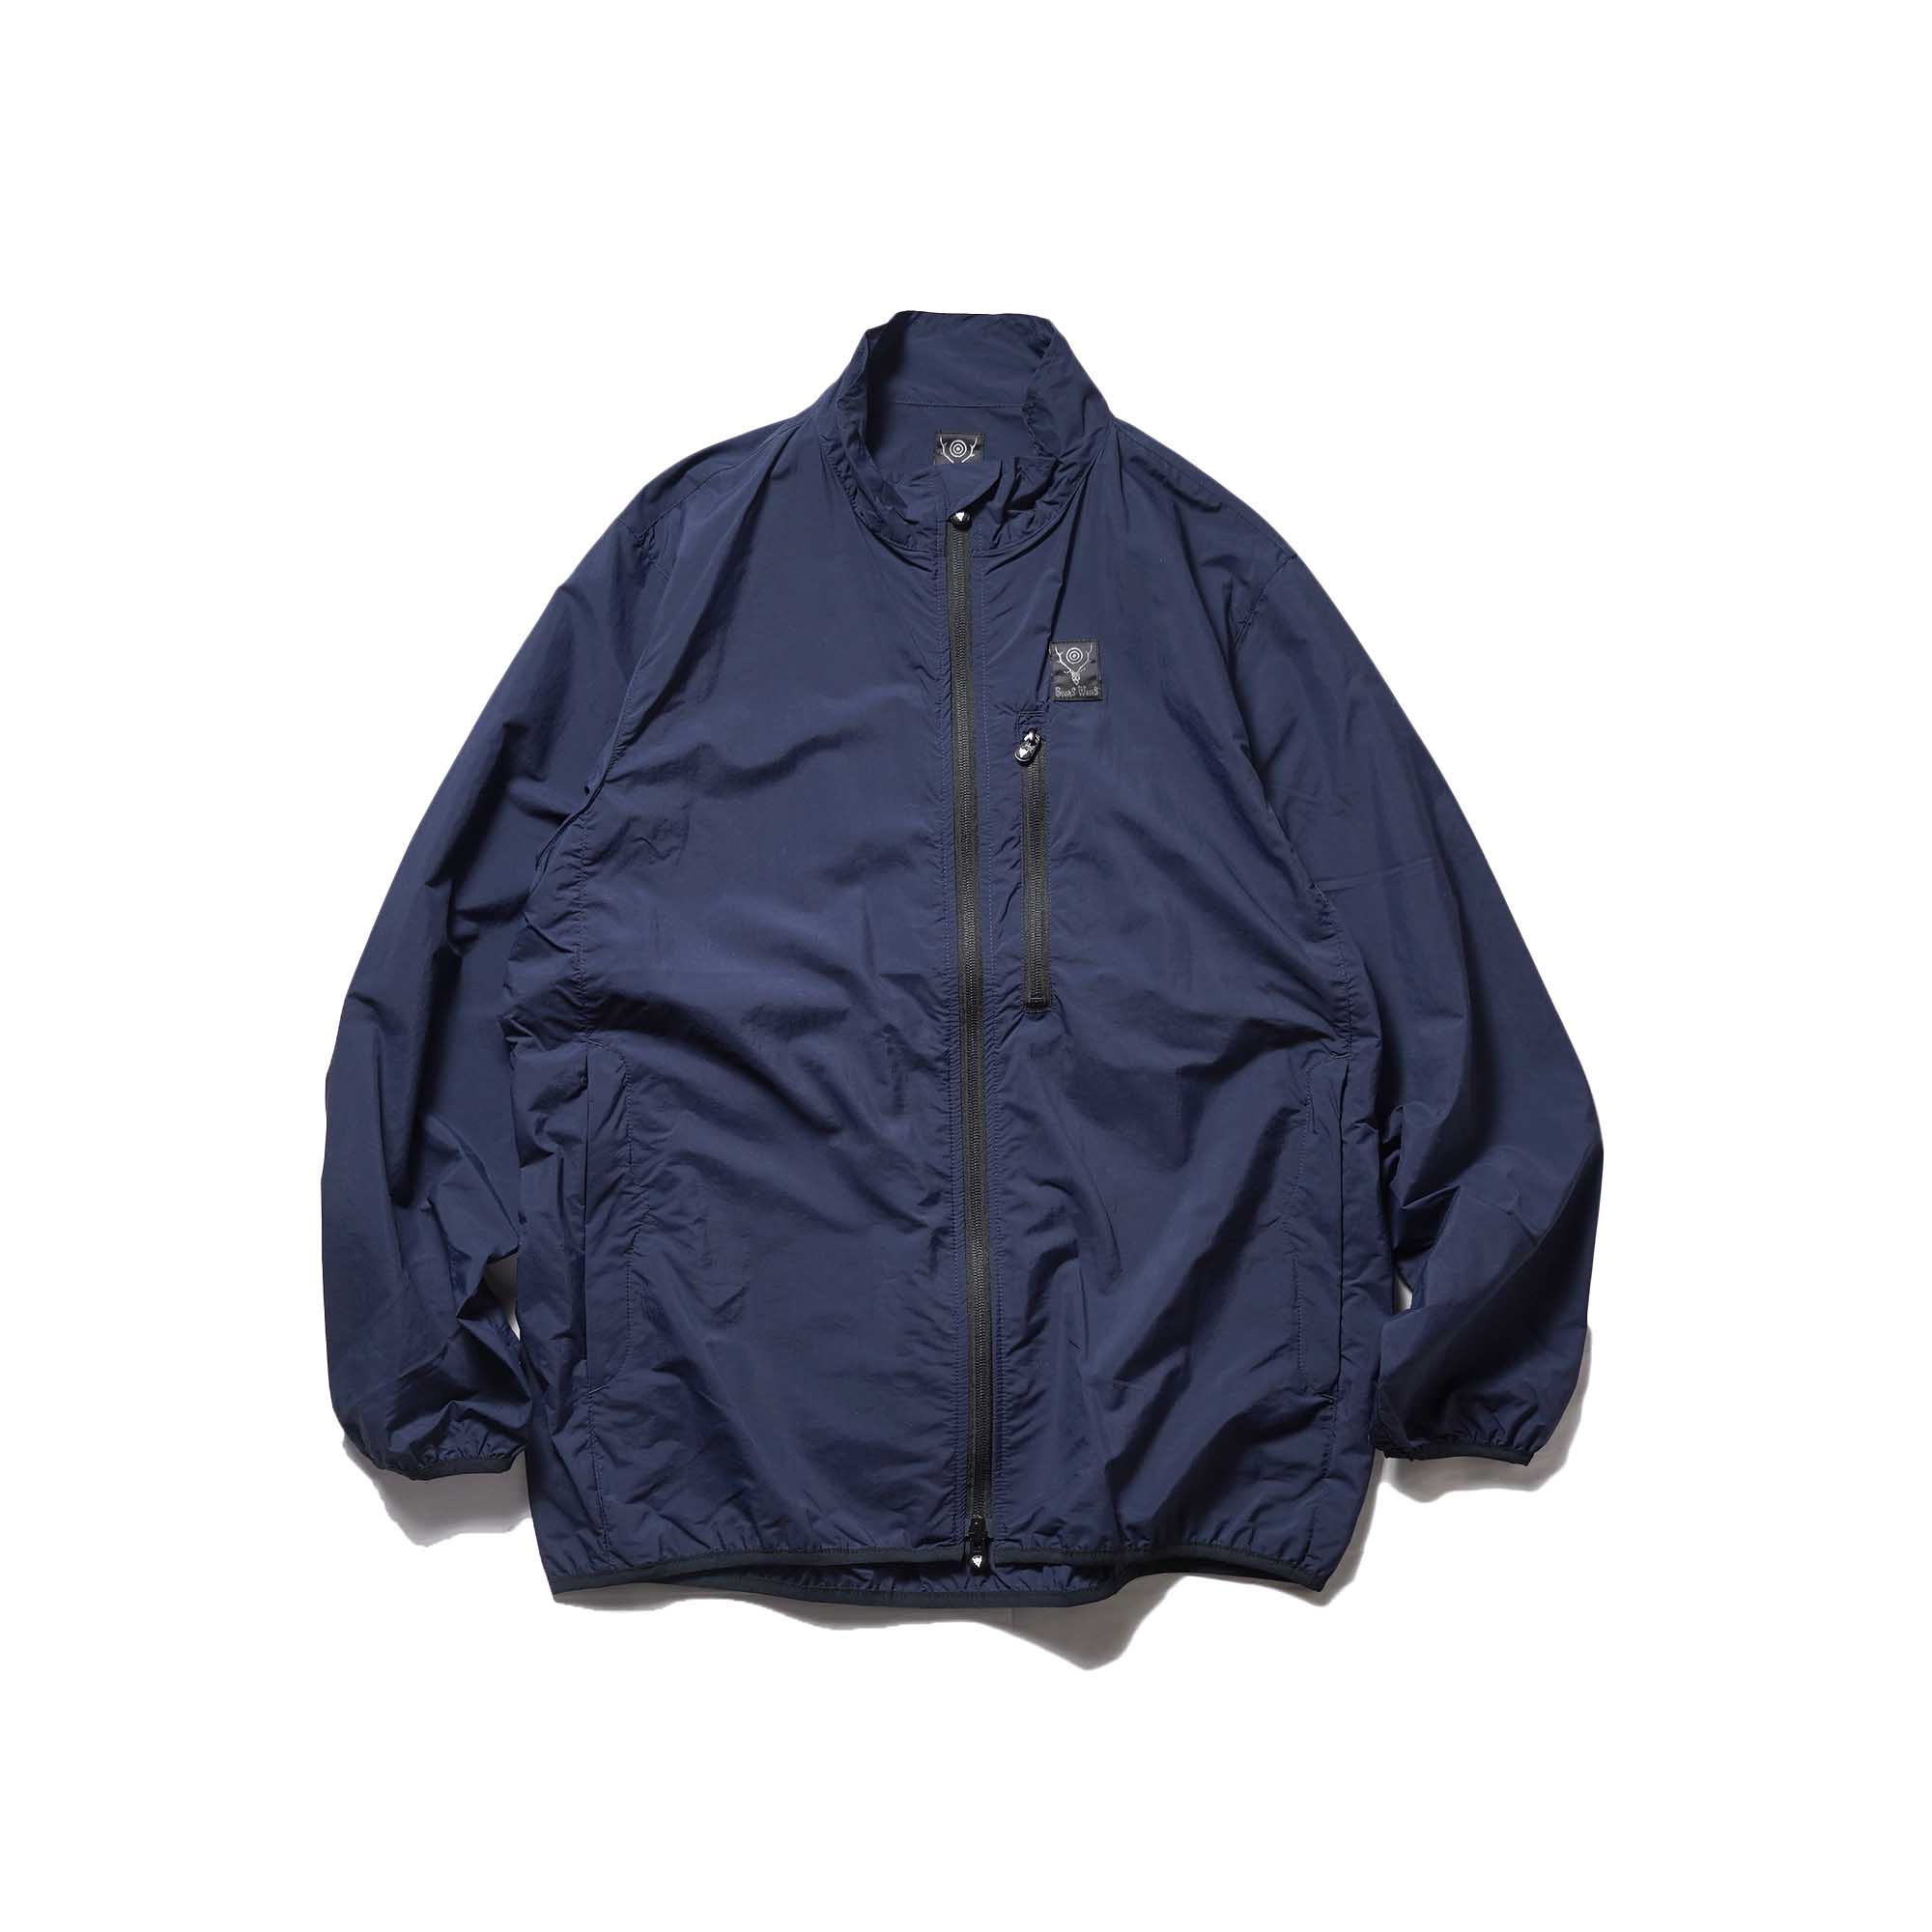 South2 West8 / Packable Jacket (Navy)